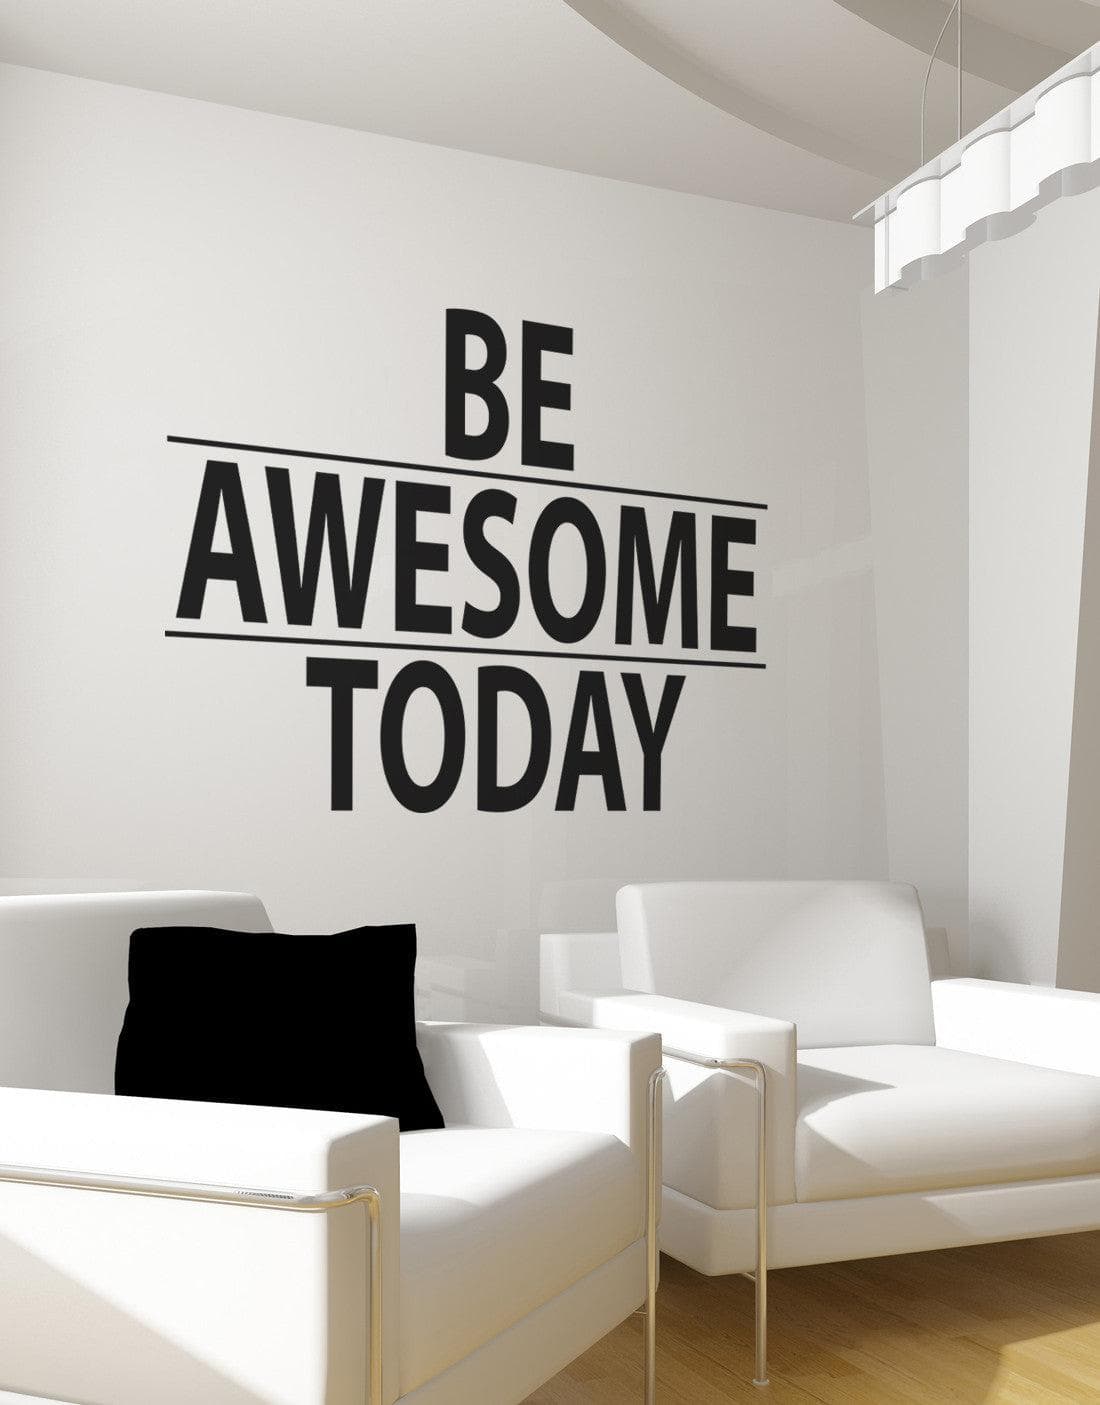 A black text decal saying "BE AWESOME TODAY" on a gray wall above two white chairs.